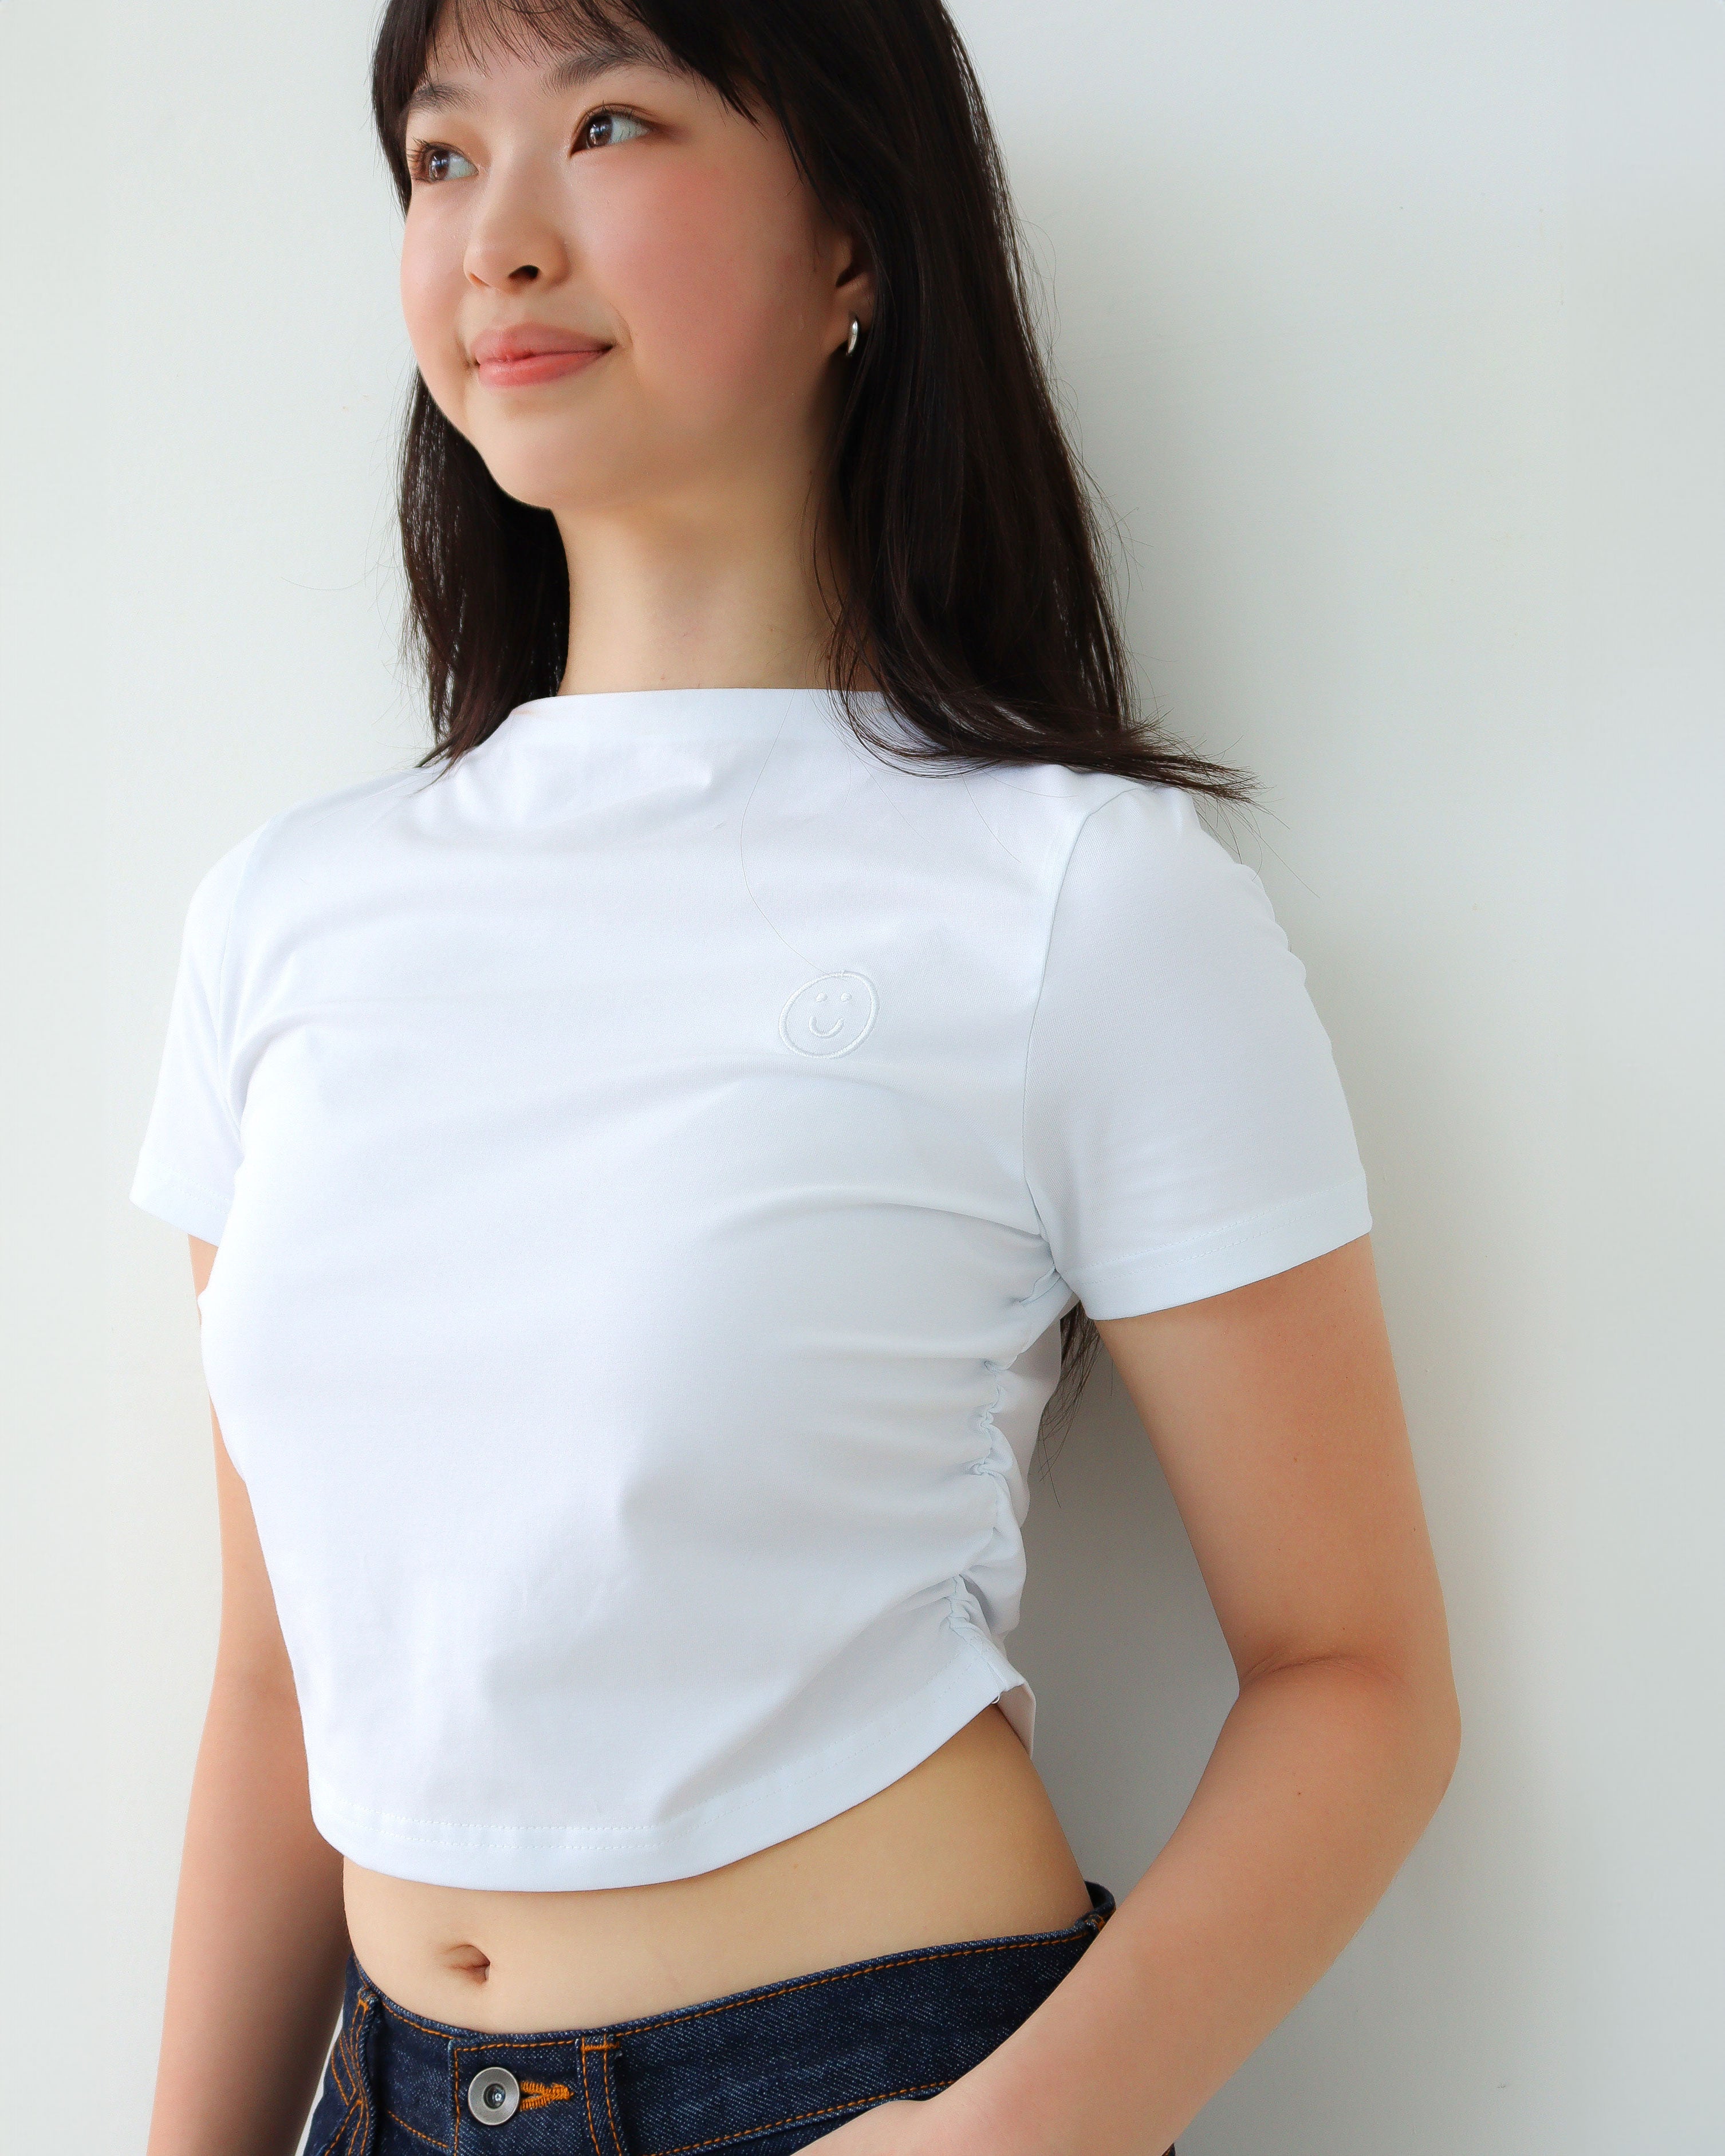 SIGNATURE/ Fitted Tee in White (Women)